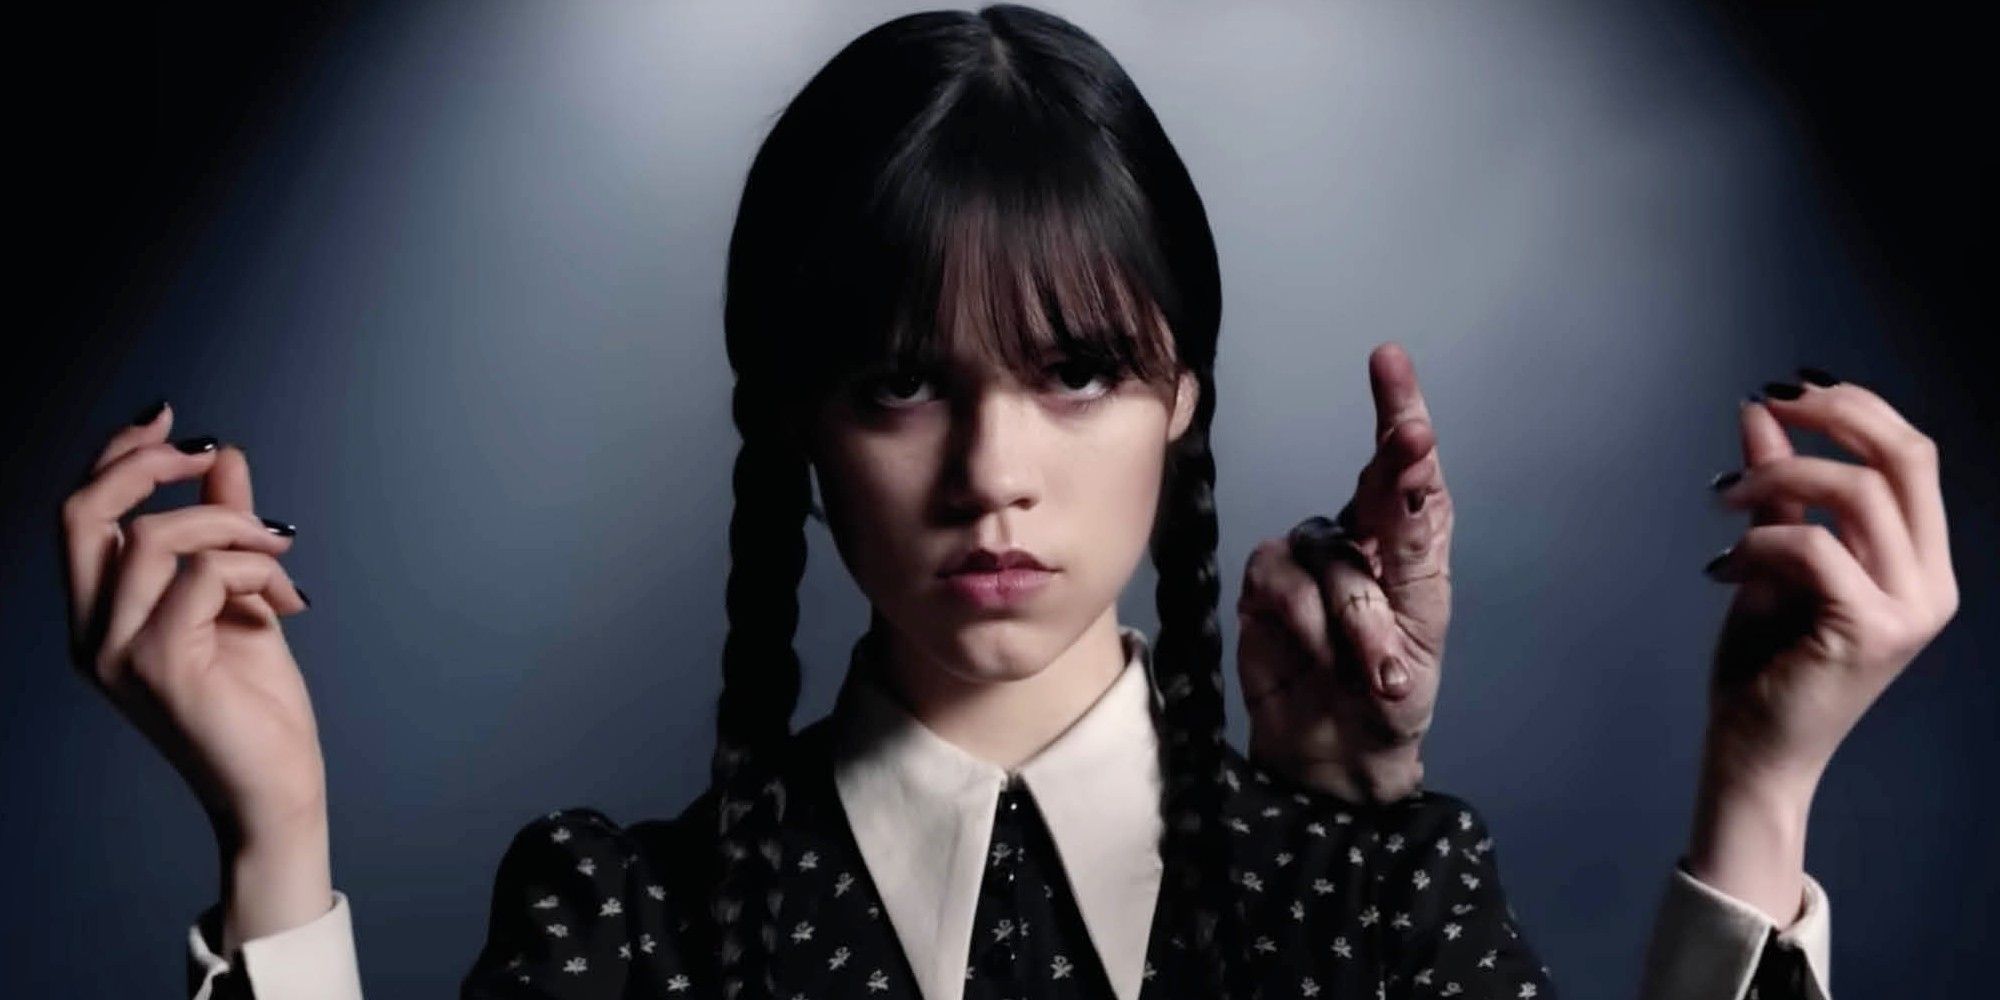 Jenna Ortega as Wednesday snaps her fingers with Thing on her shoulder in Wednesday